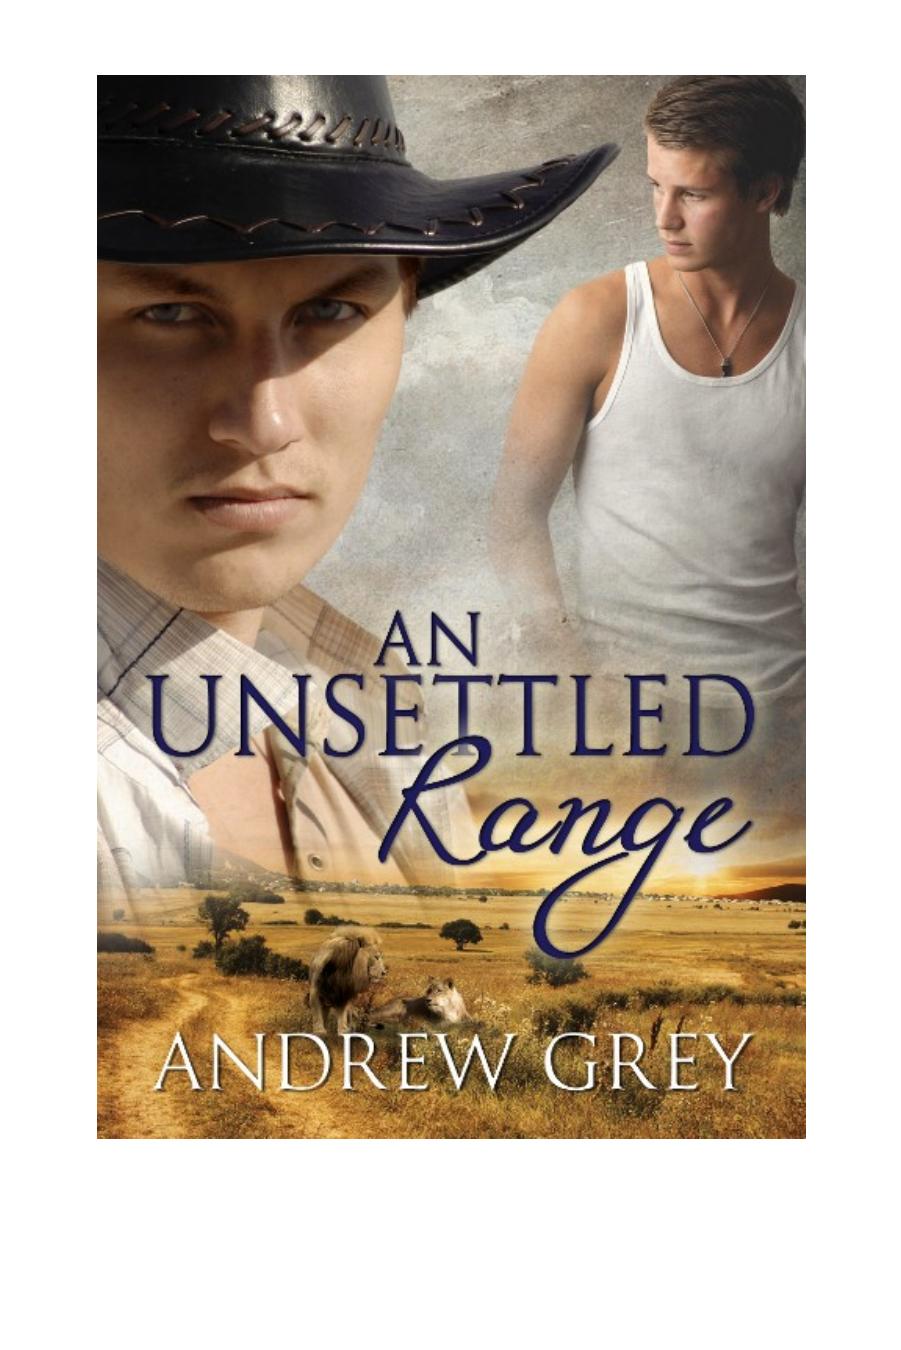 An Unsettled Range by Andrew Grey